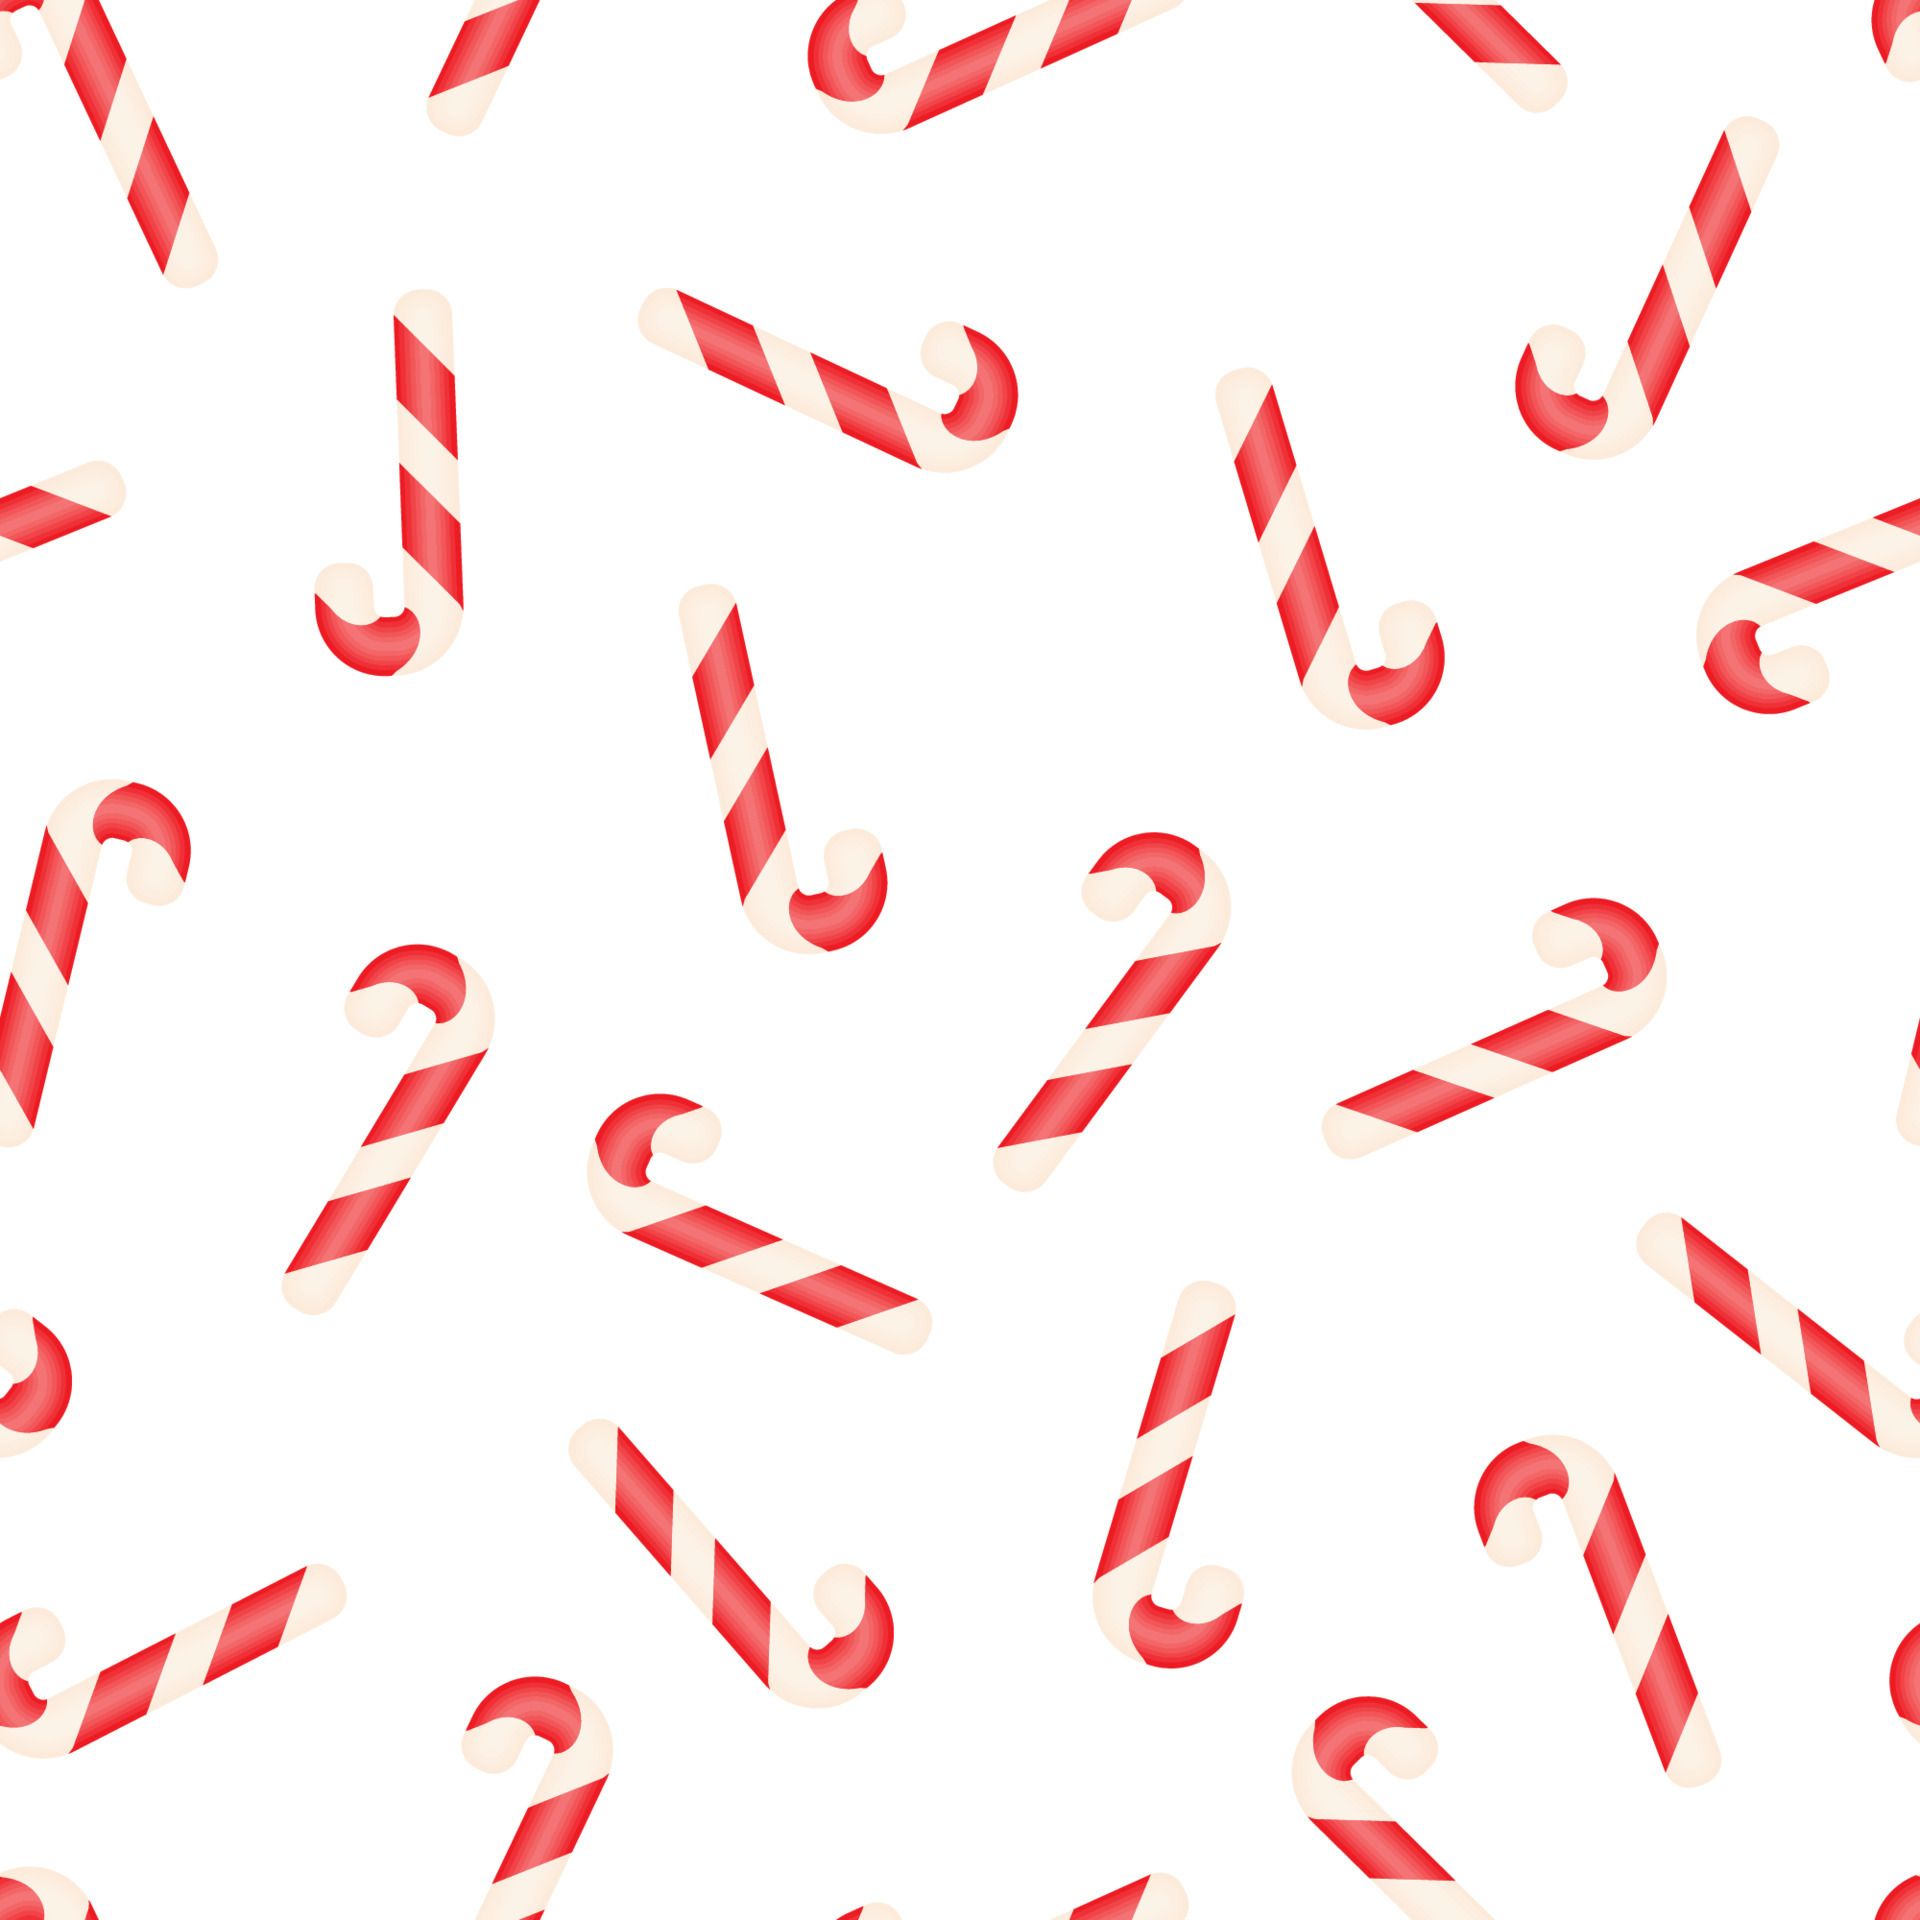 A pattern of red and white candy canes - Candy cane